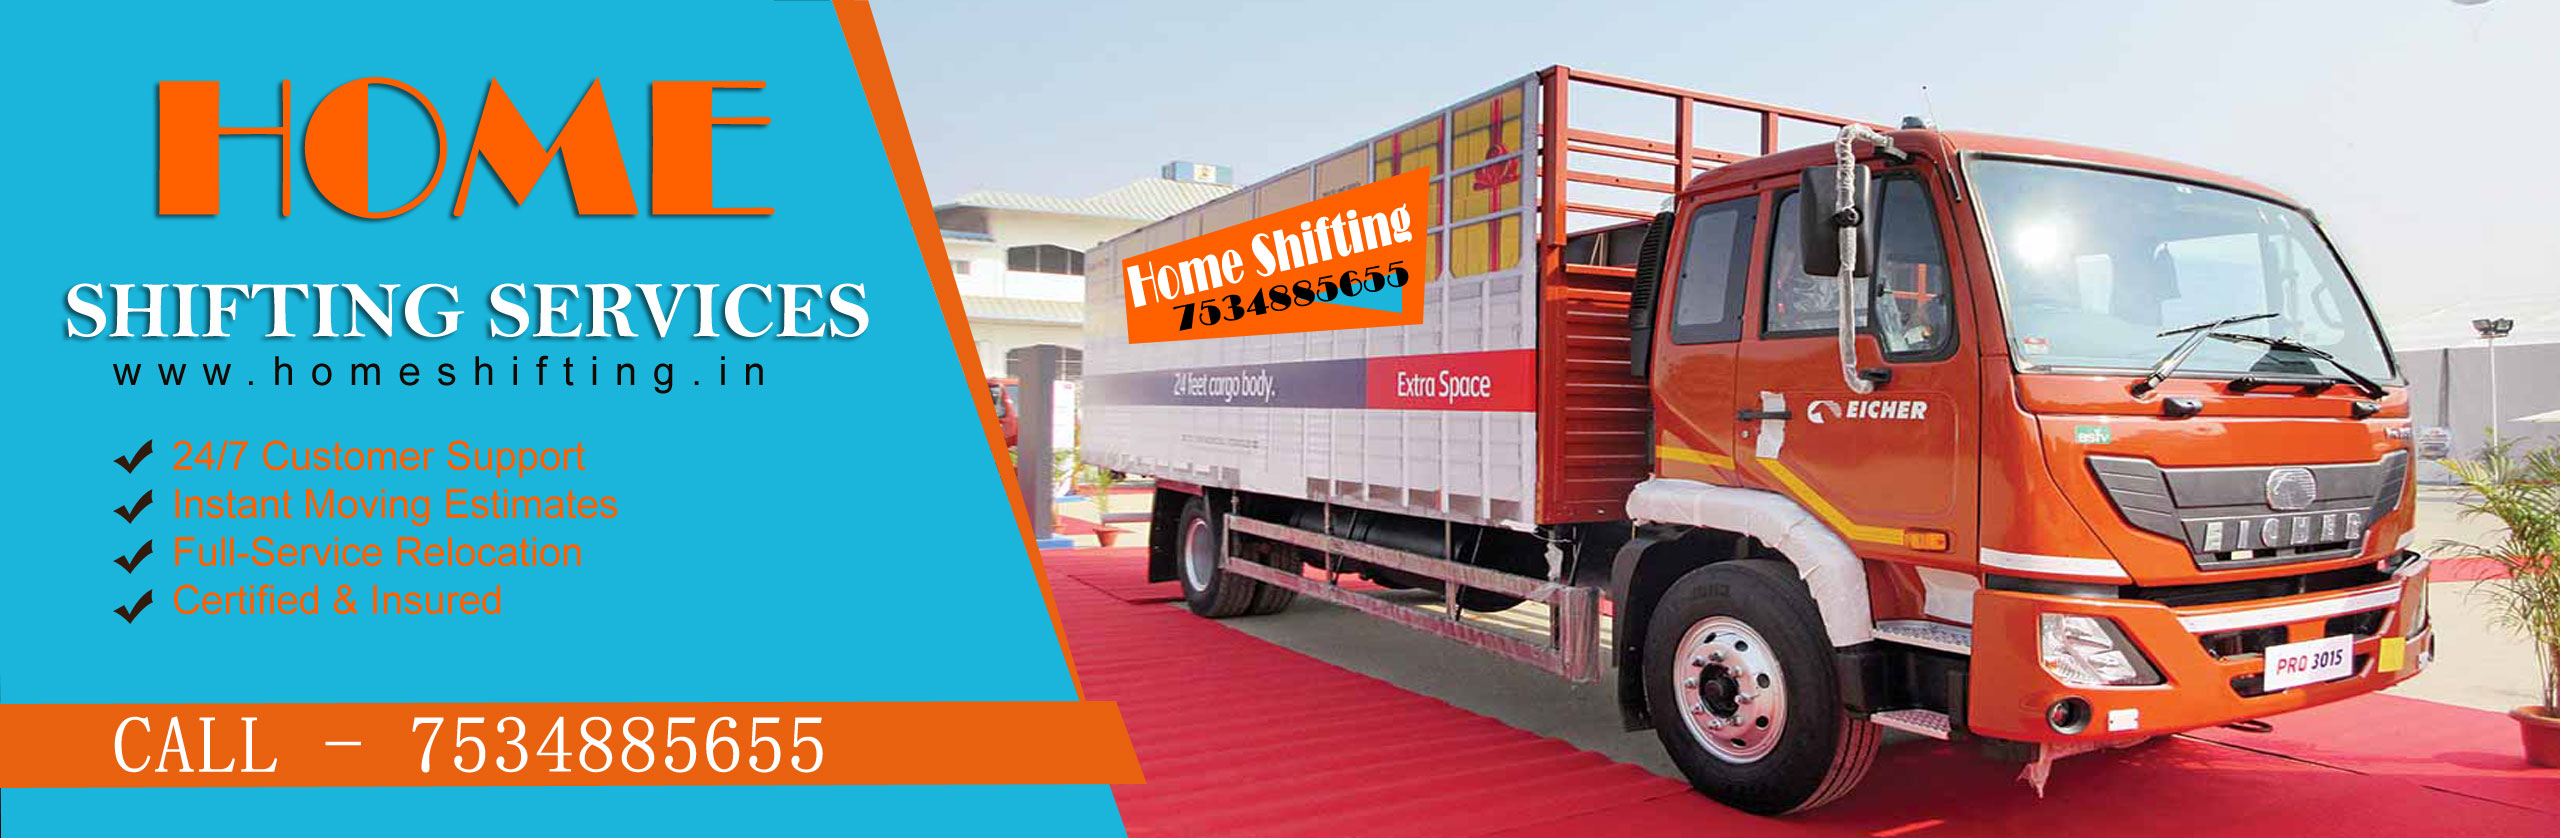 Home Shifting Banner by Hindustan cargo packers and movers